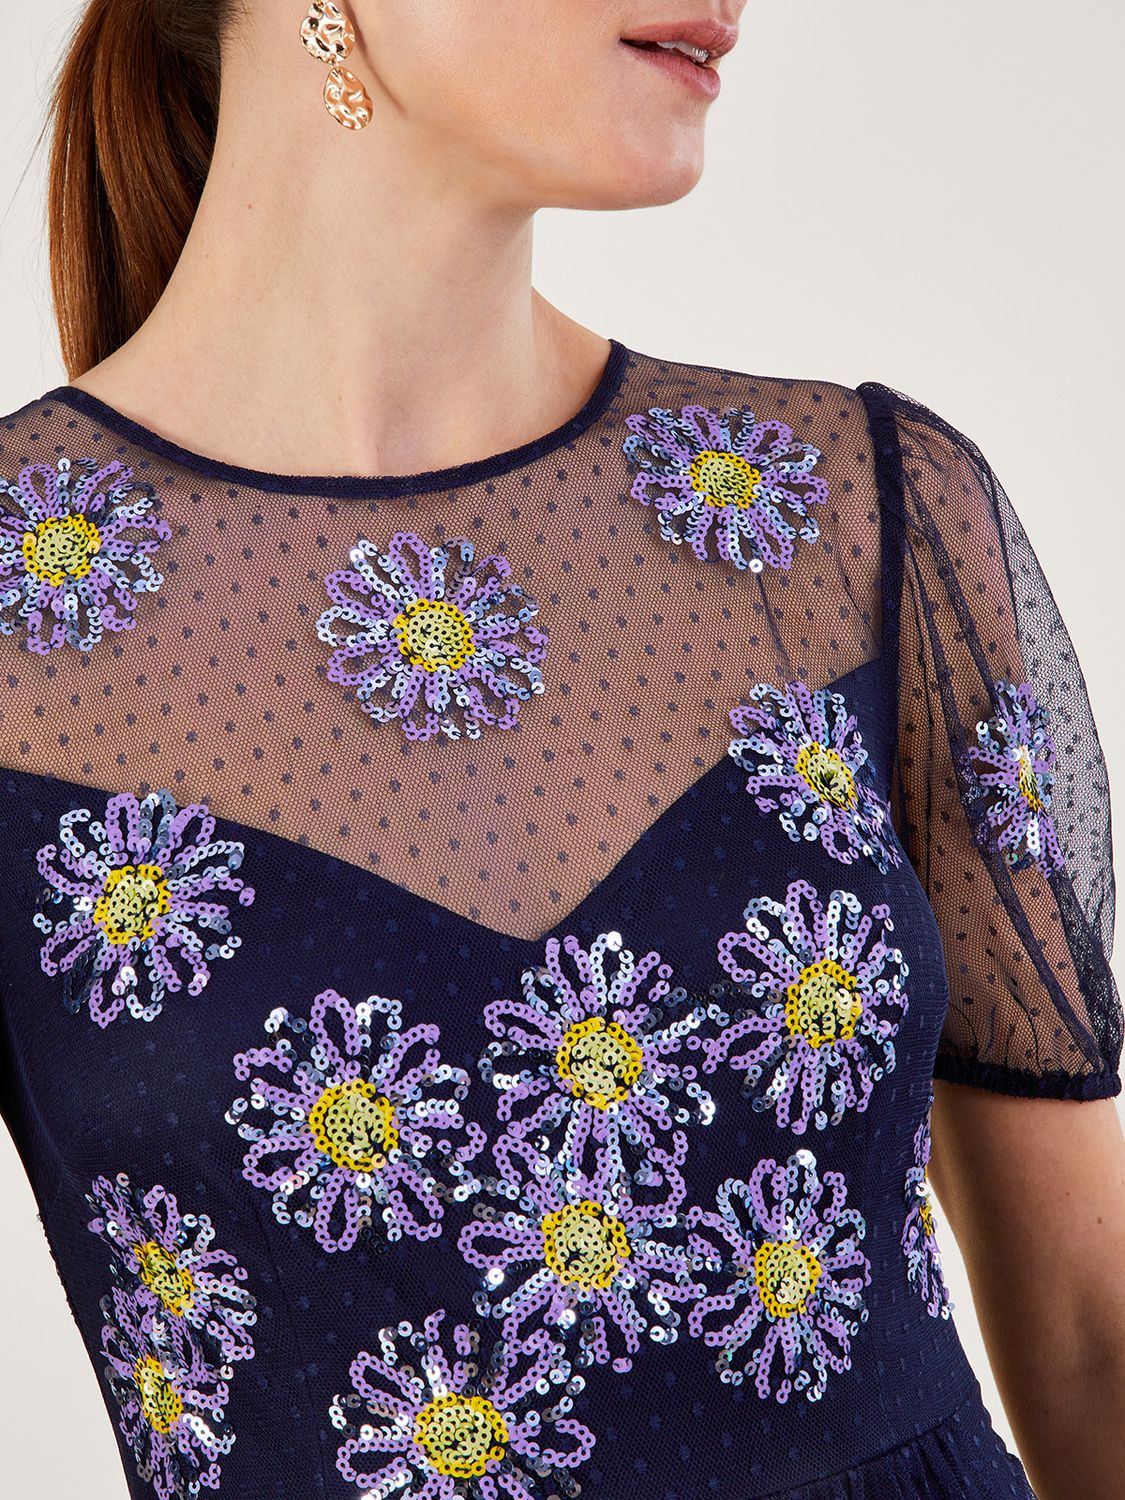 Monsoon Nellie Embroidered Midi Dress, Navy/Multi at John Lewis & Partners